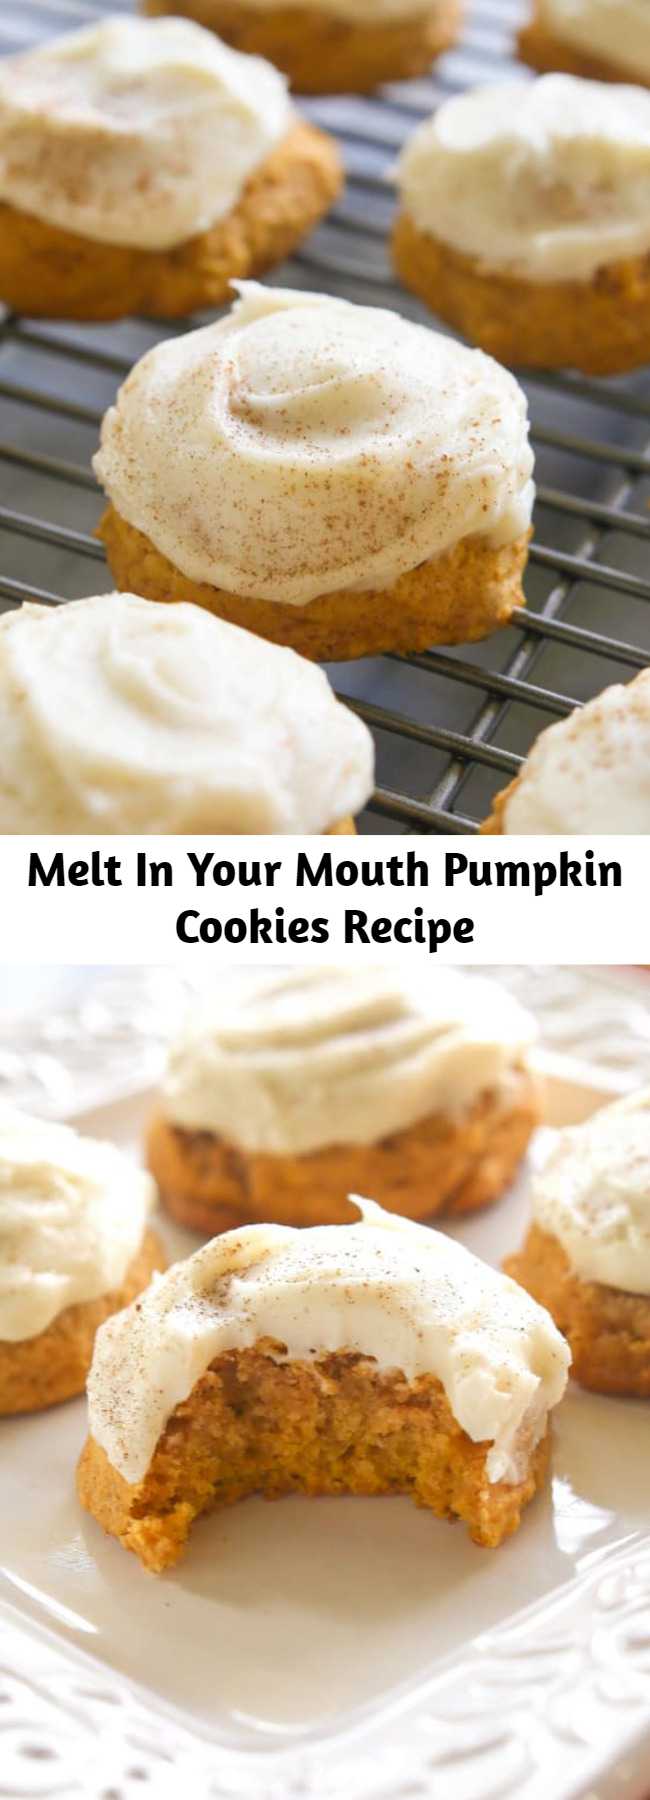 Melt In Your Mouth Pumpkin Cookies Recipe - Melt In Your Mouth Pumpkin Cookies are incredibly soft and well,…melt-in-your-mouth! These cookies have a mild pumpkin flavor and are topped with a decadent cream cheese frosting. The perfect fall dessert. #pumpkin #cookies #comfortfood